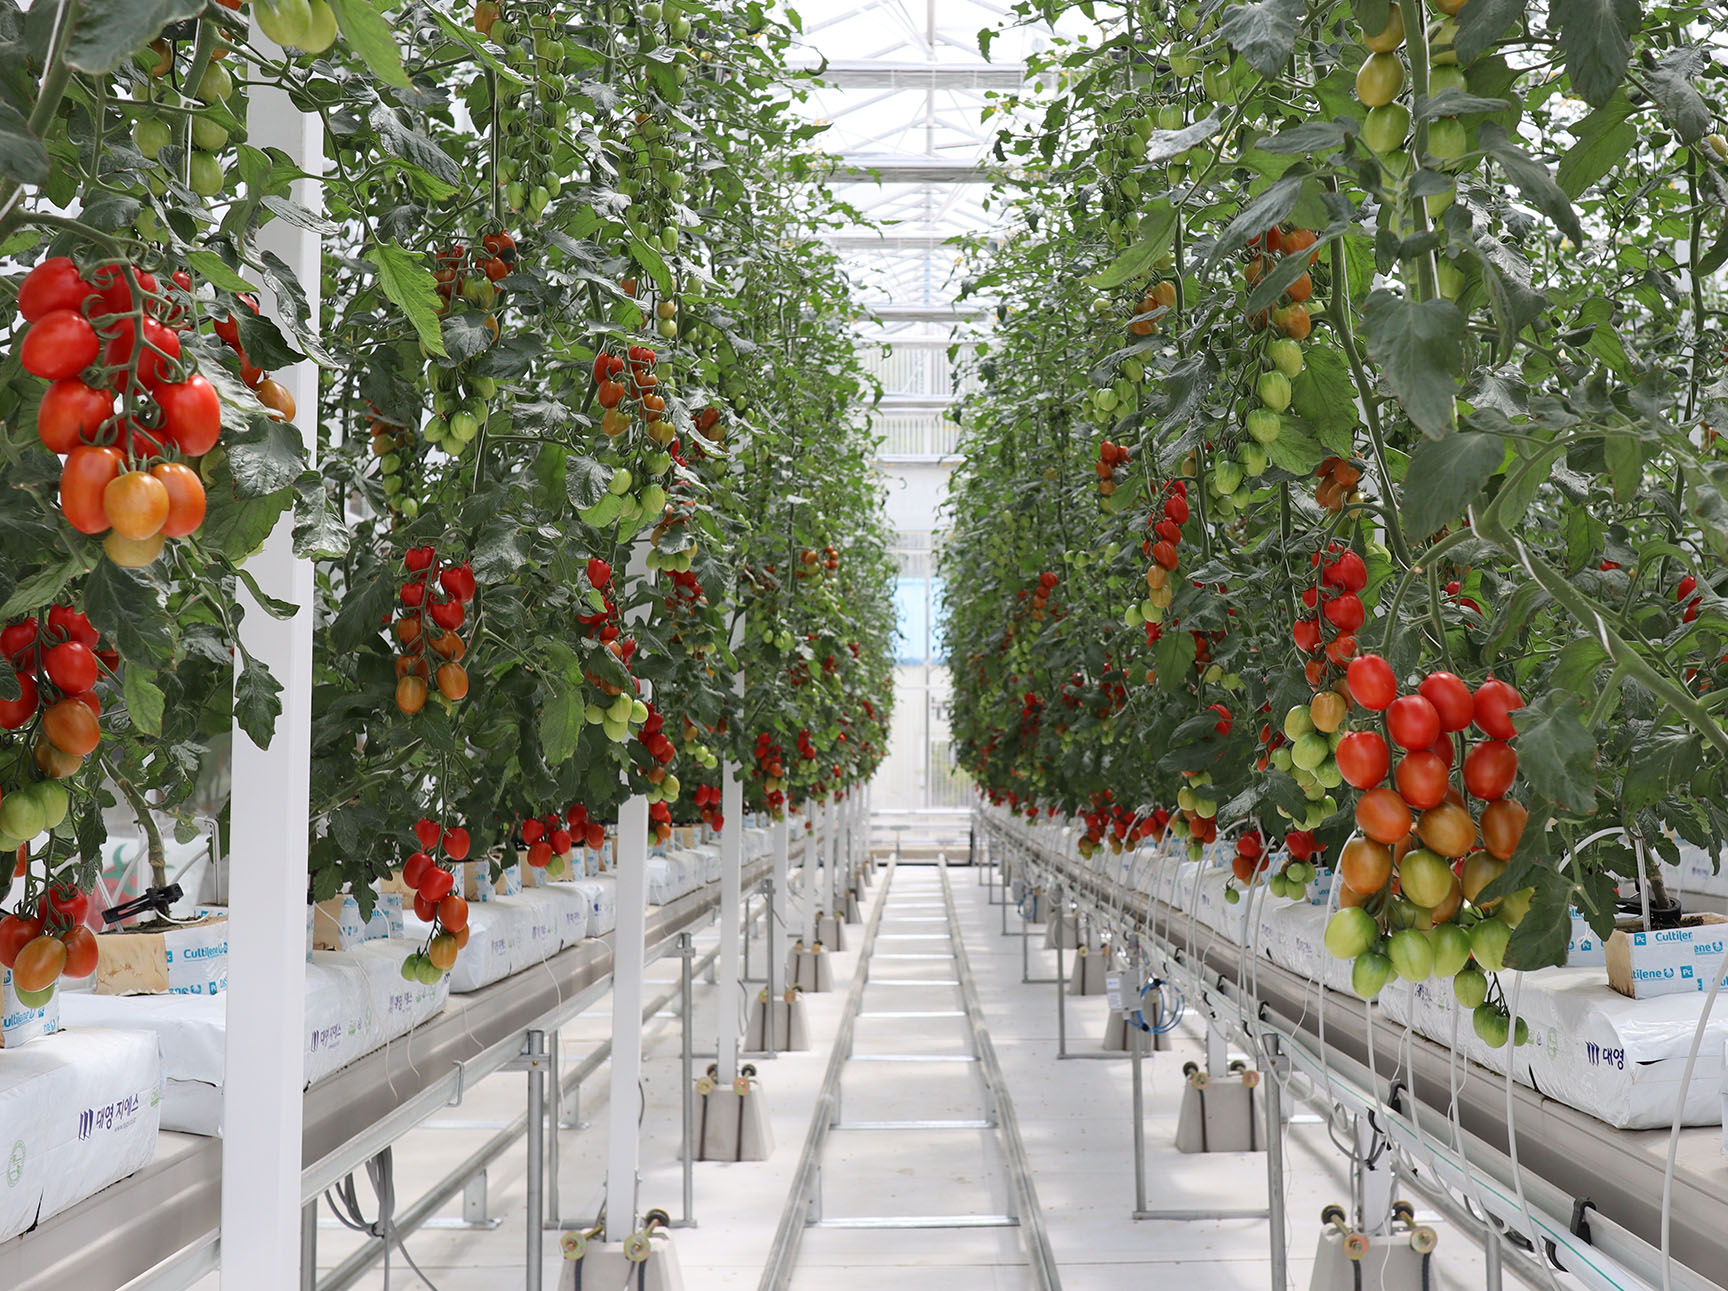 Fully grown tomato plants in a smart farm greenhouse